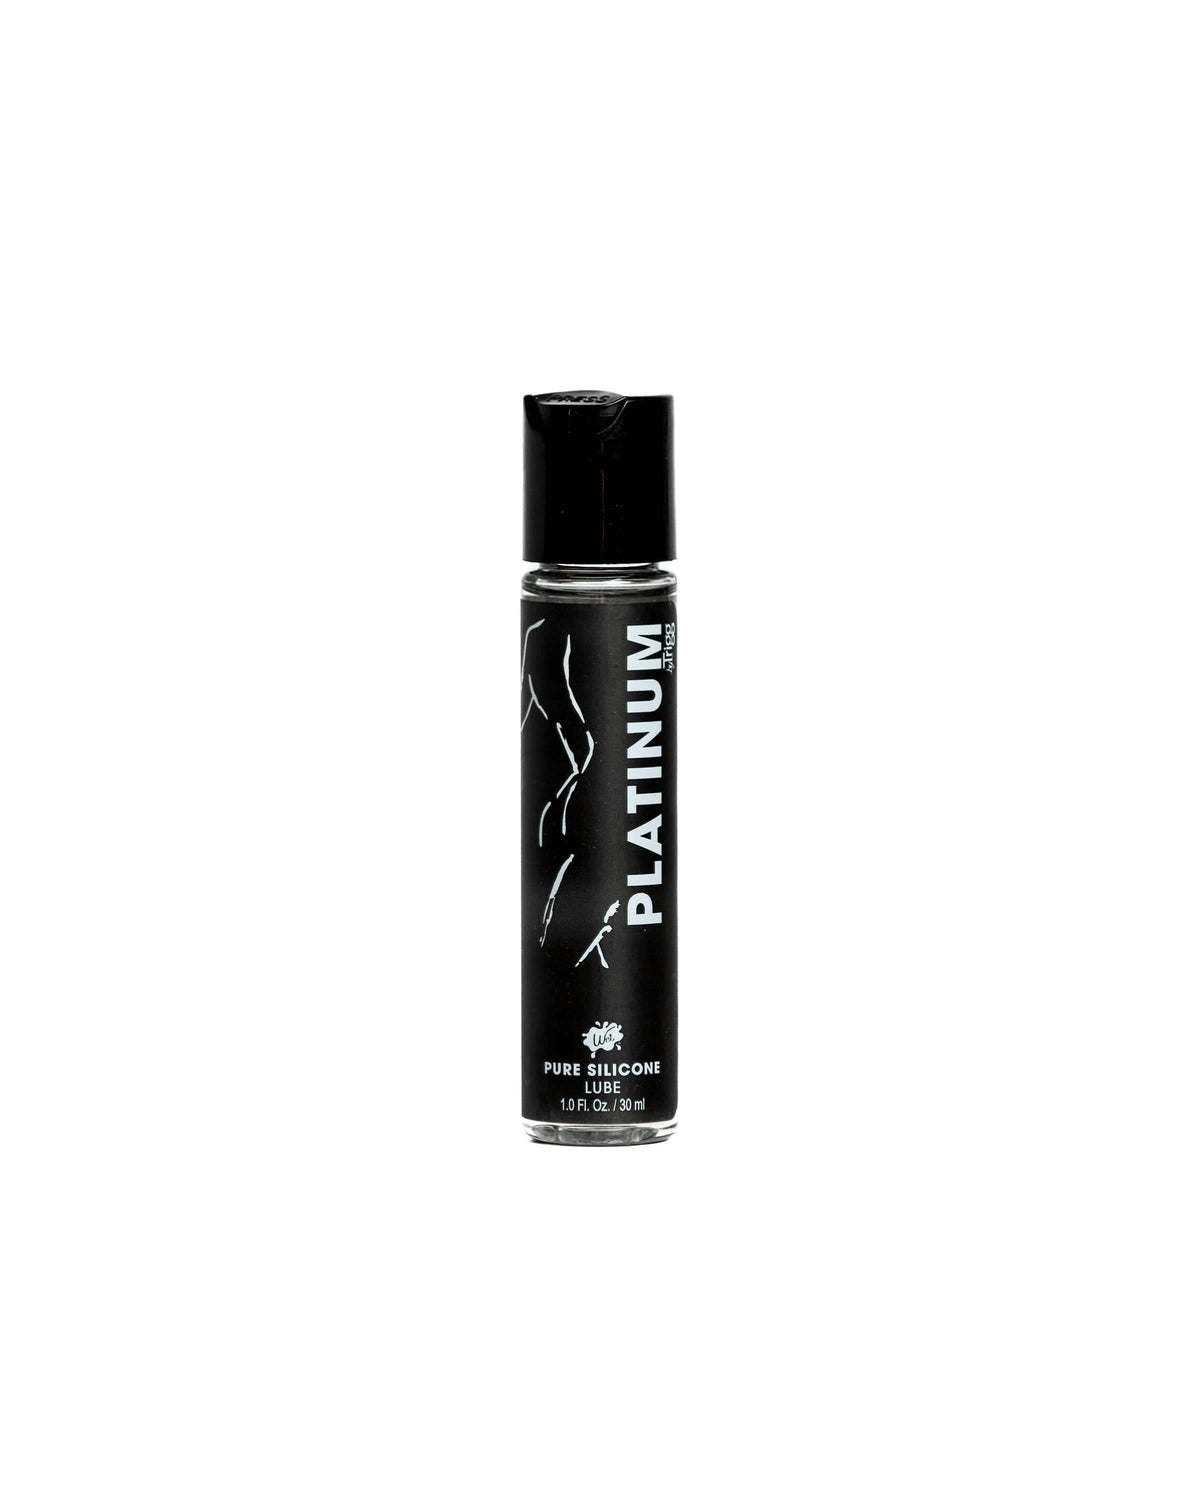 lube, personal lubricant